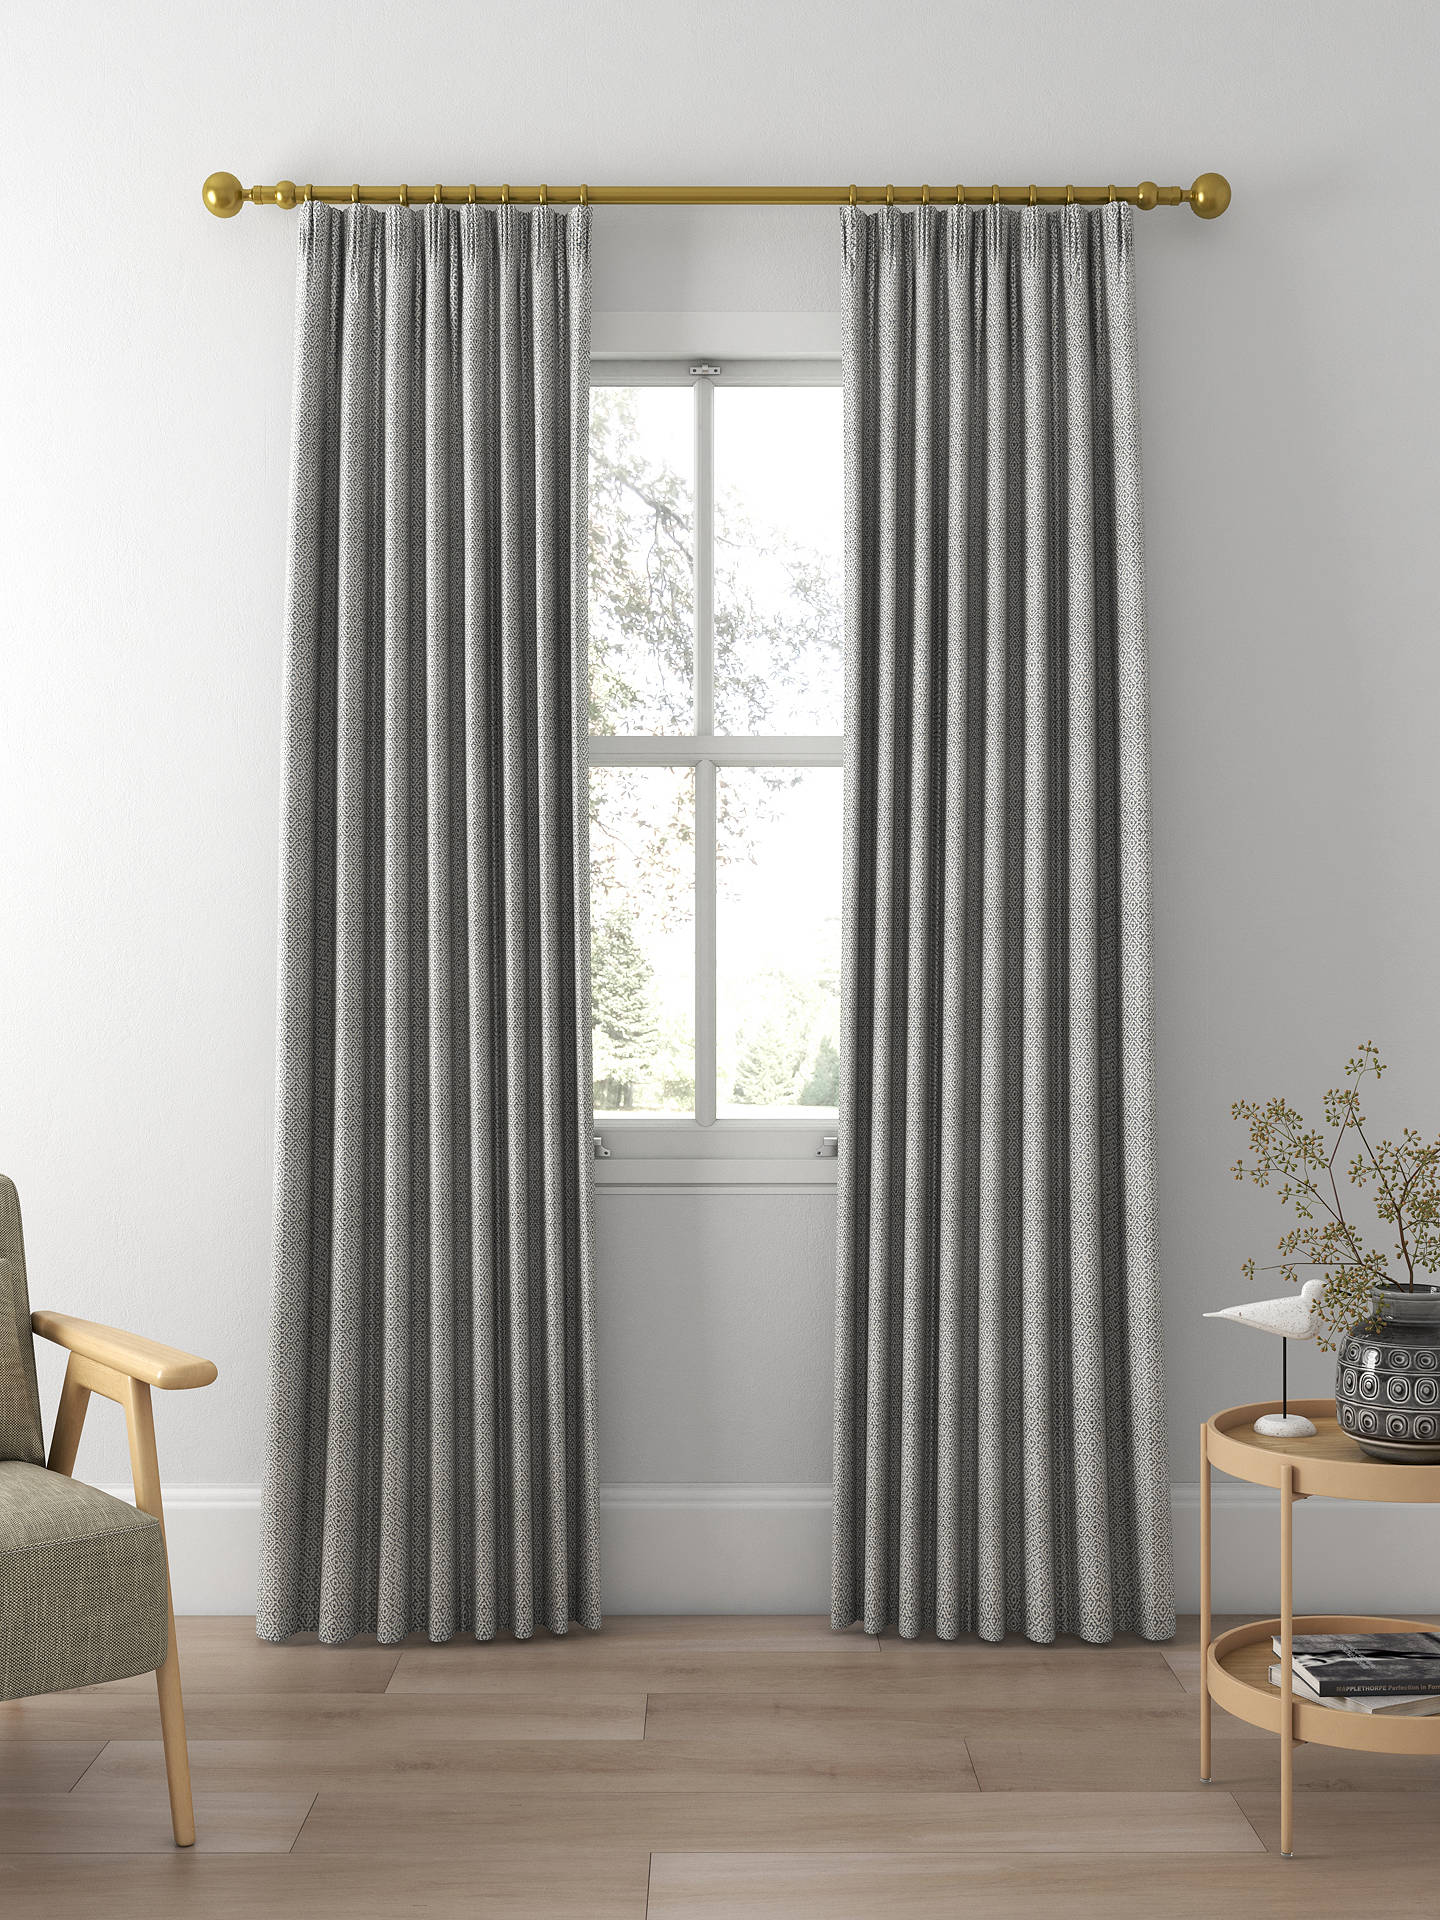 Sanderson Linden Made to Measure Curtains, China Blue